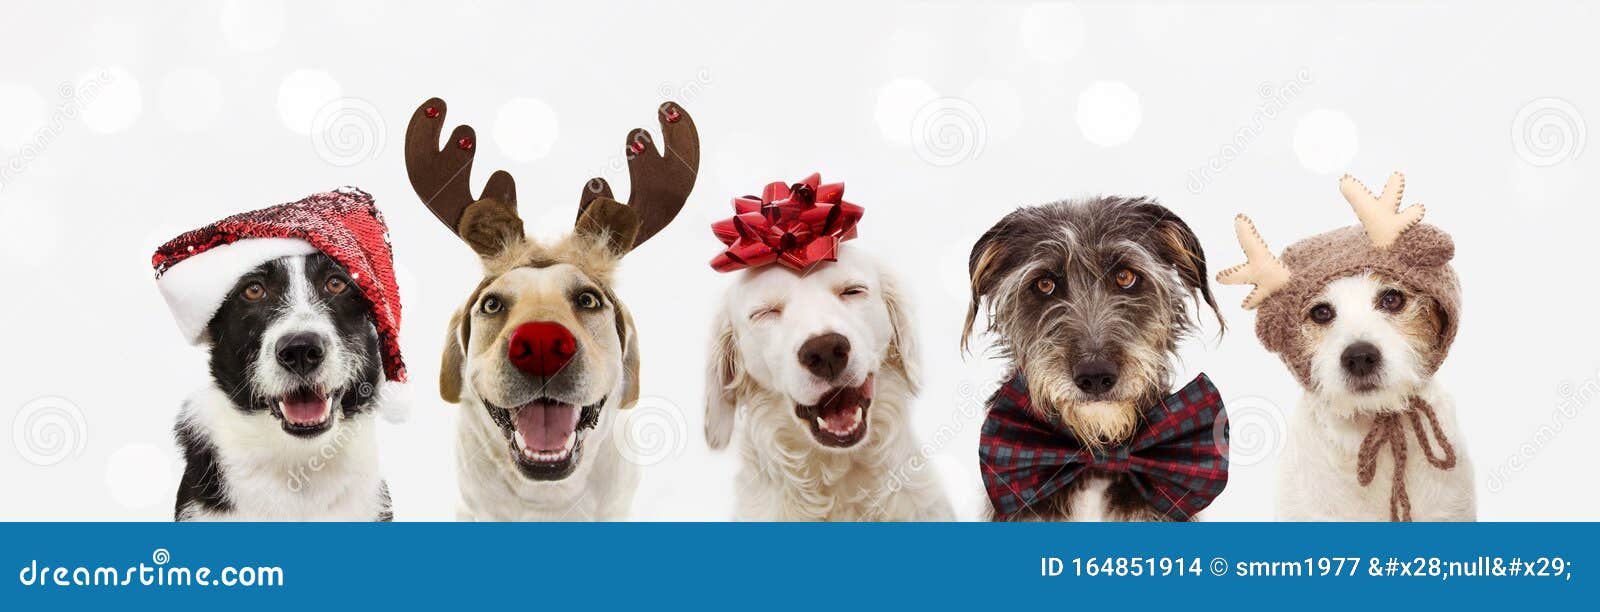 banner five dogs celebrating christmas holidays wearing a red santa claus hat, reindeer antlers and red present ribbon. 